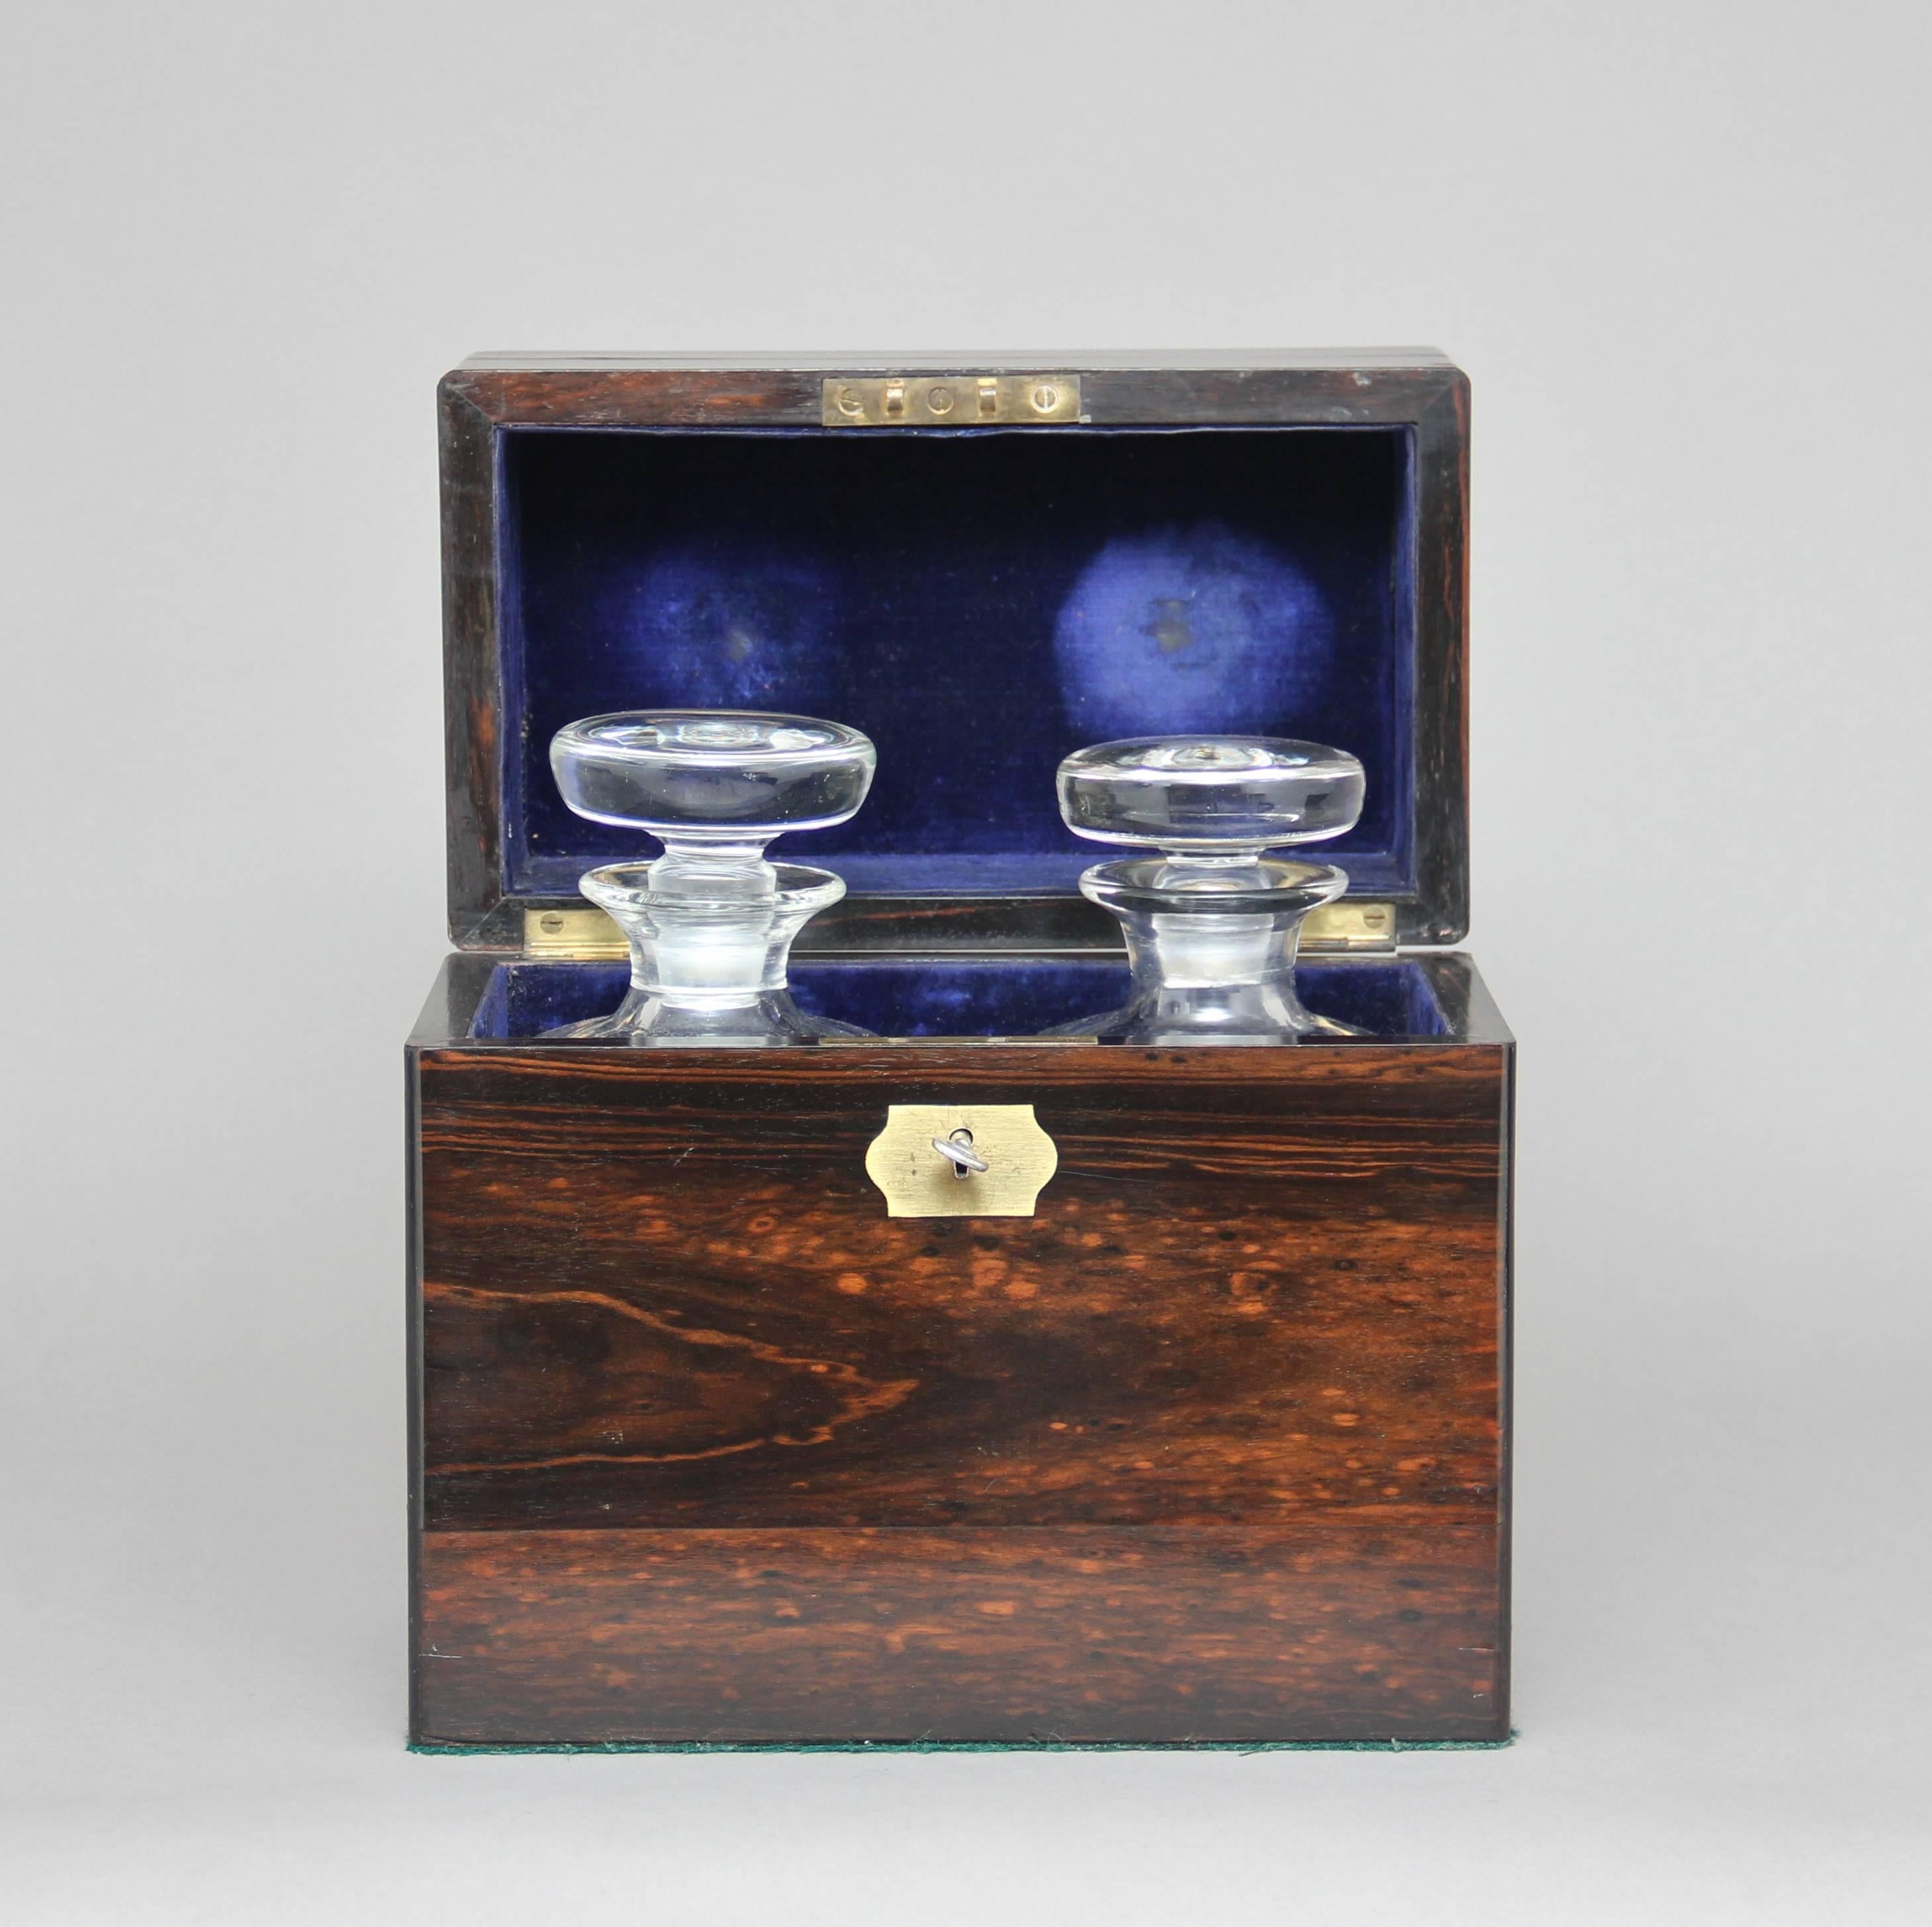 A lovely quality 19th century coromandel decanter box with a recessed brass carrying handle on the top, a brass escutcheon on the front and a key for the lock, the box contains two glass decanters which are engraved scotch and gin, circa 1880.